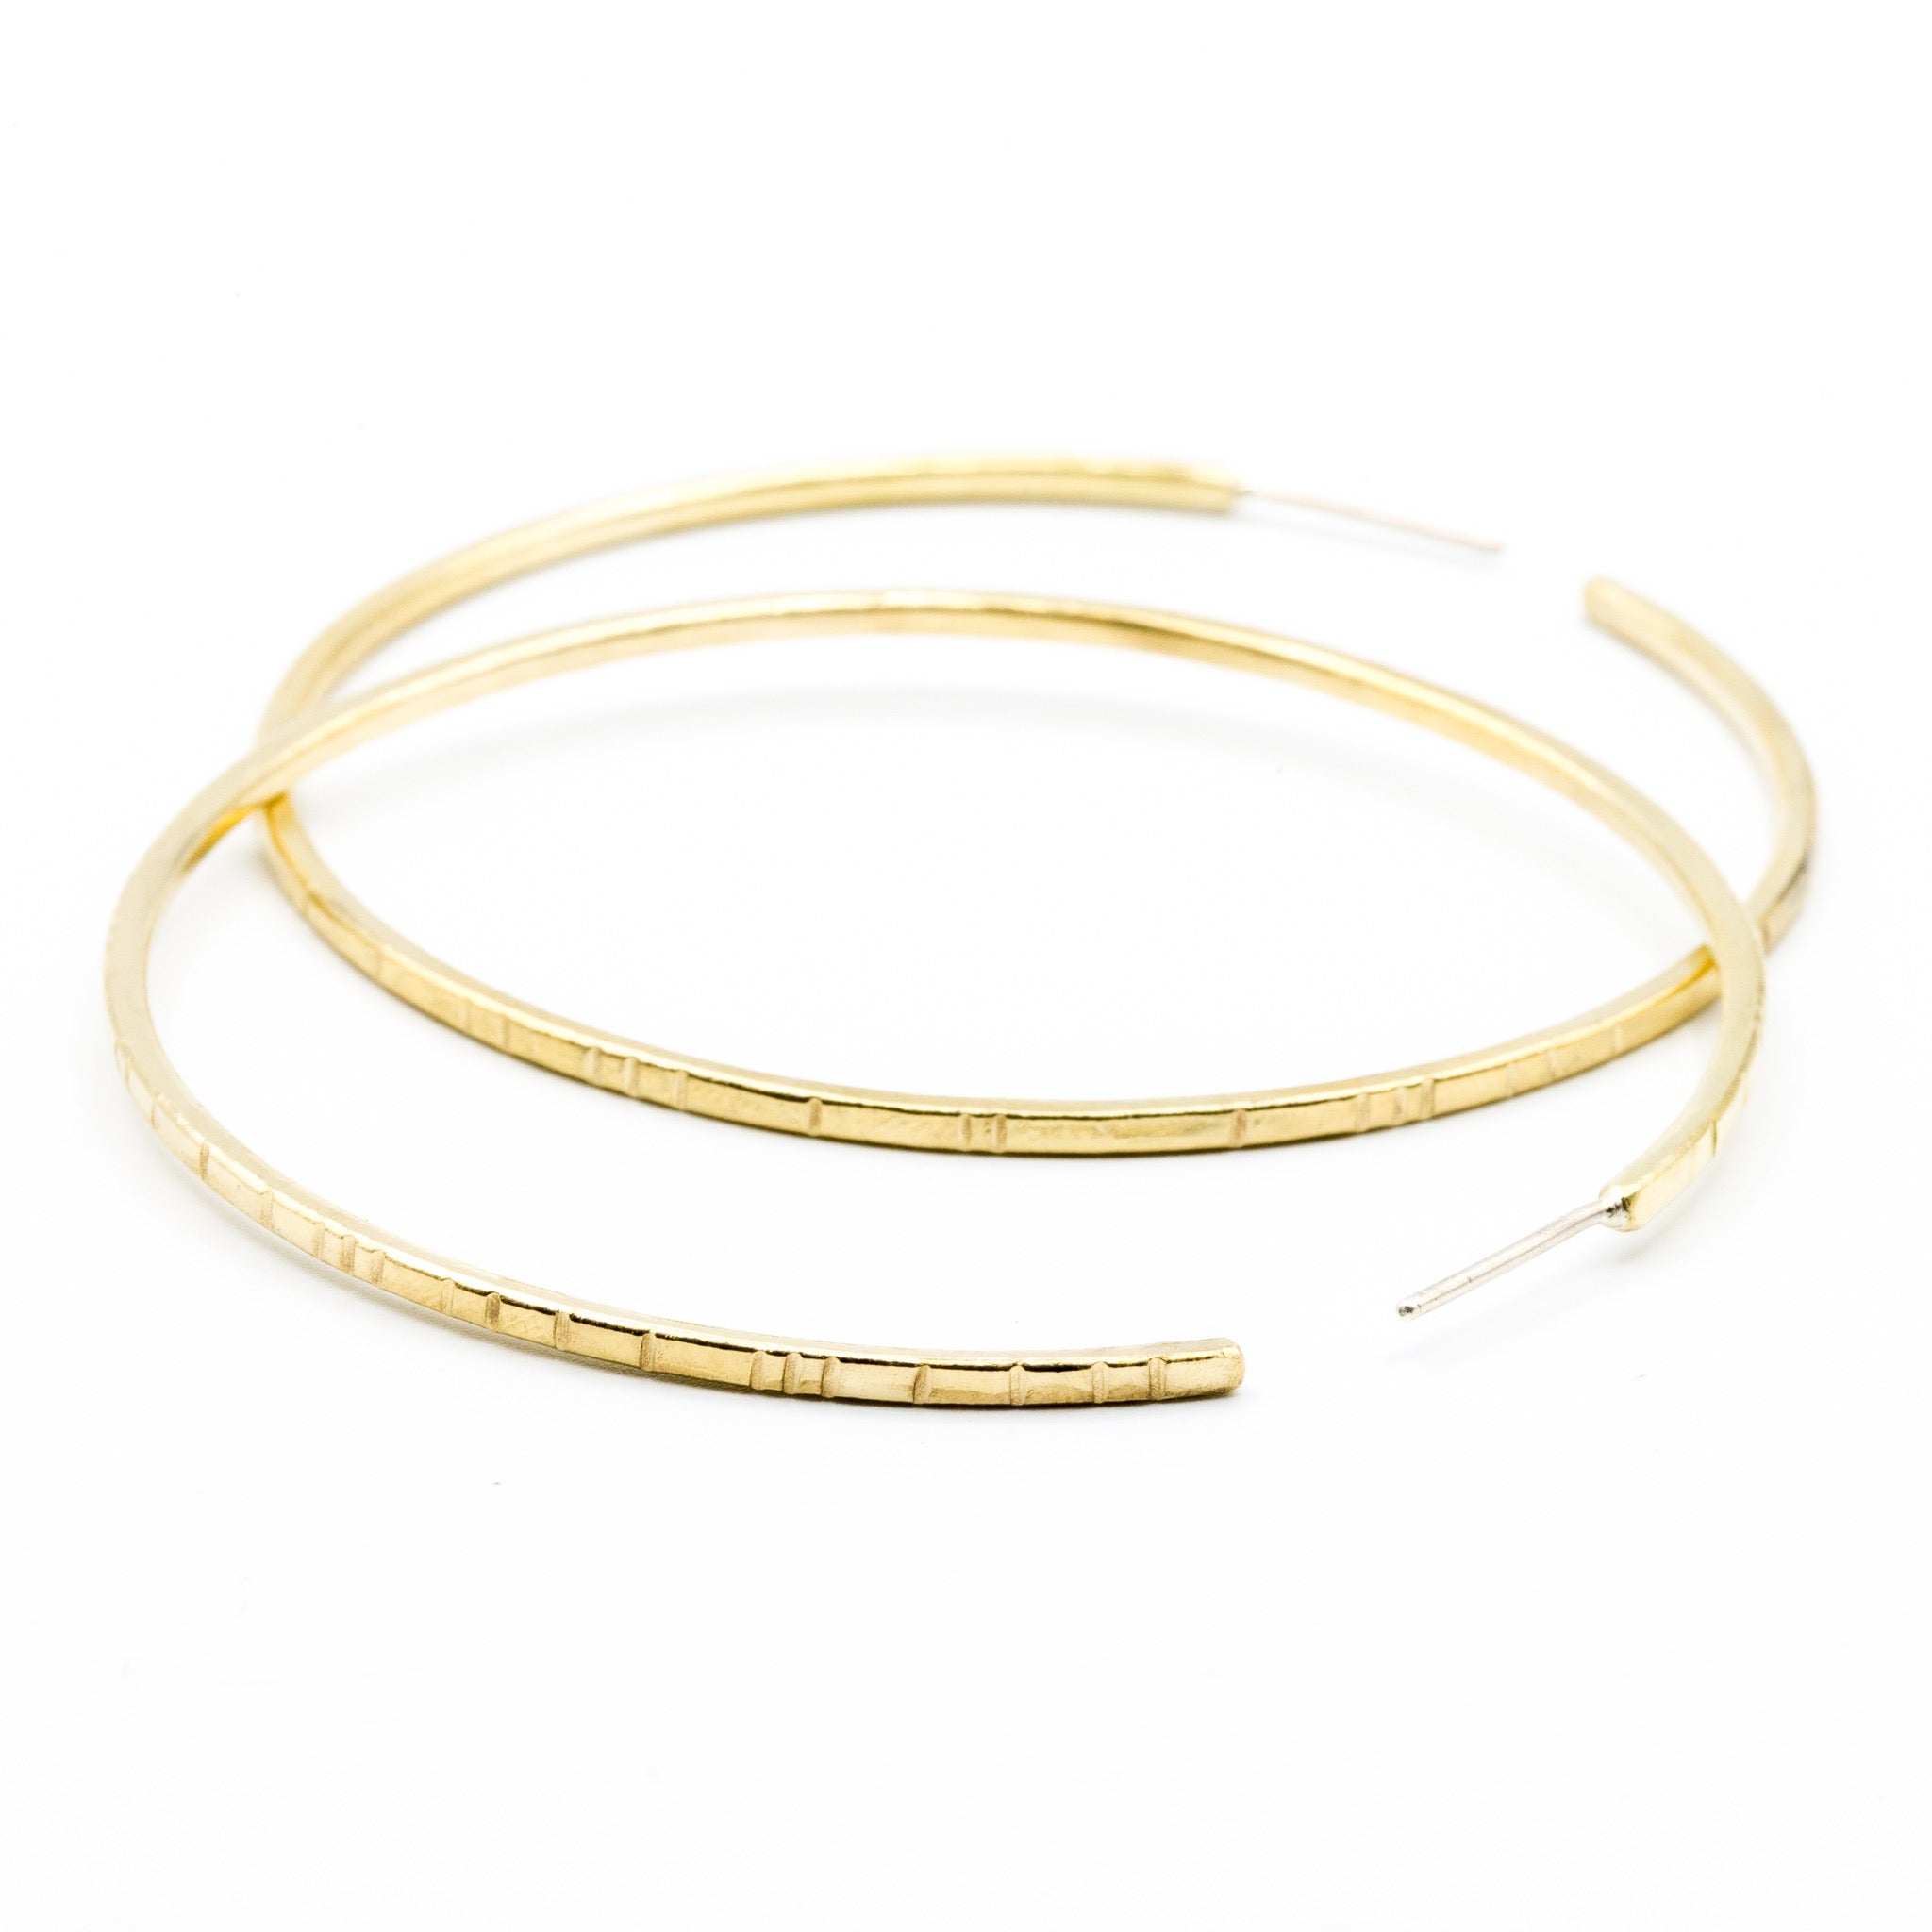 big brass hoops with lined details on white background